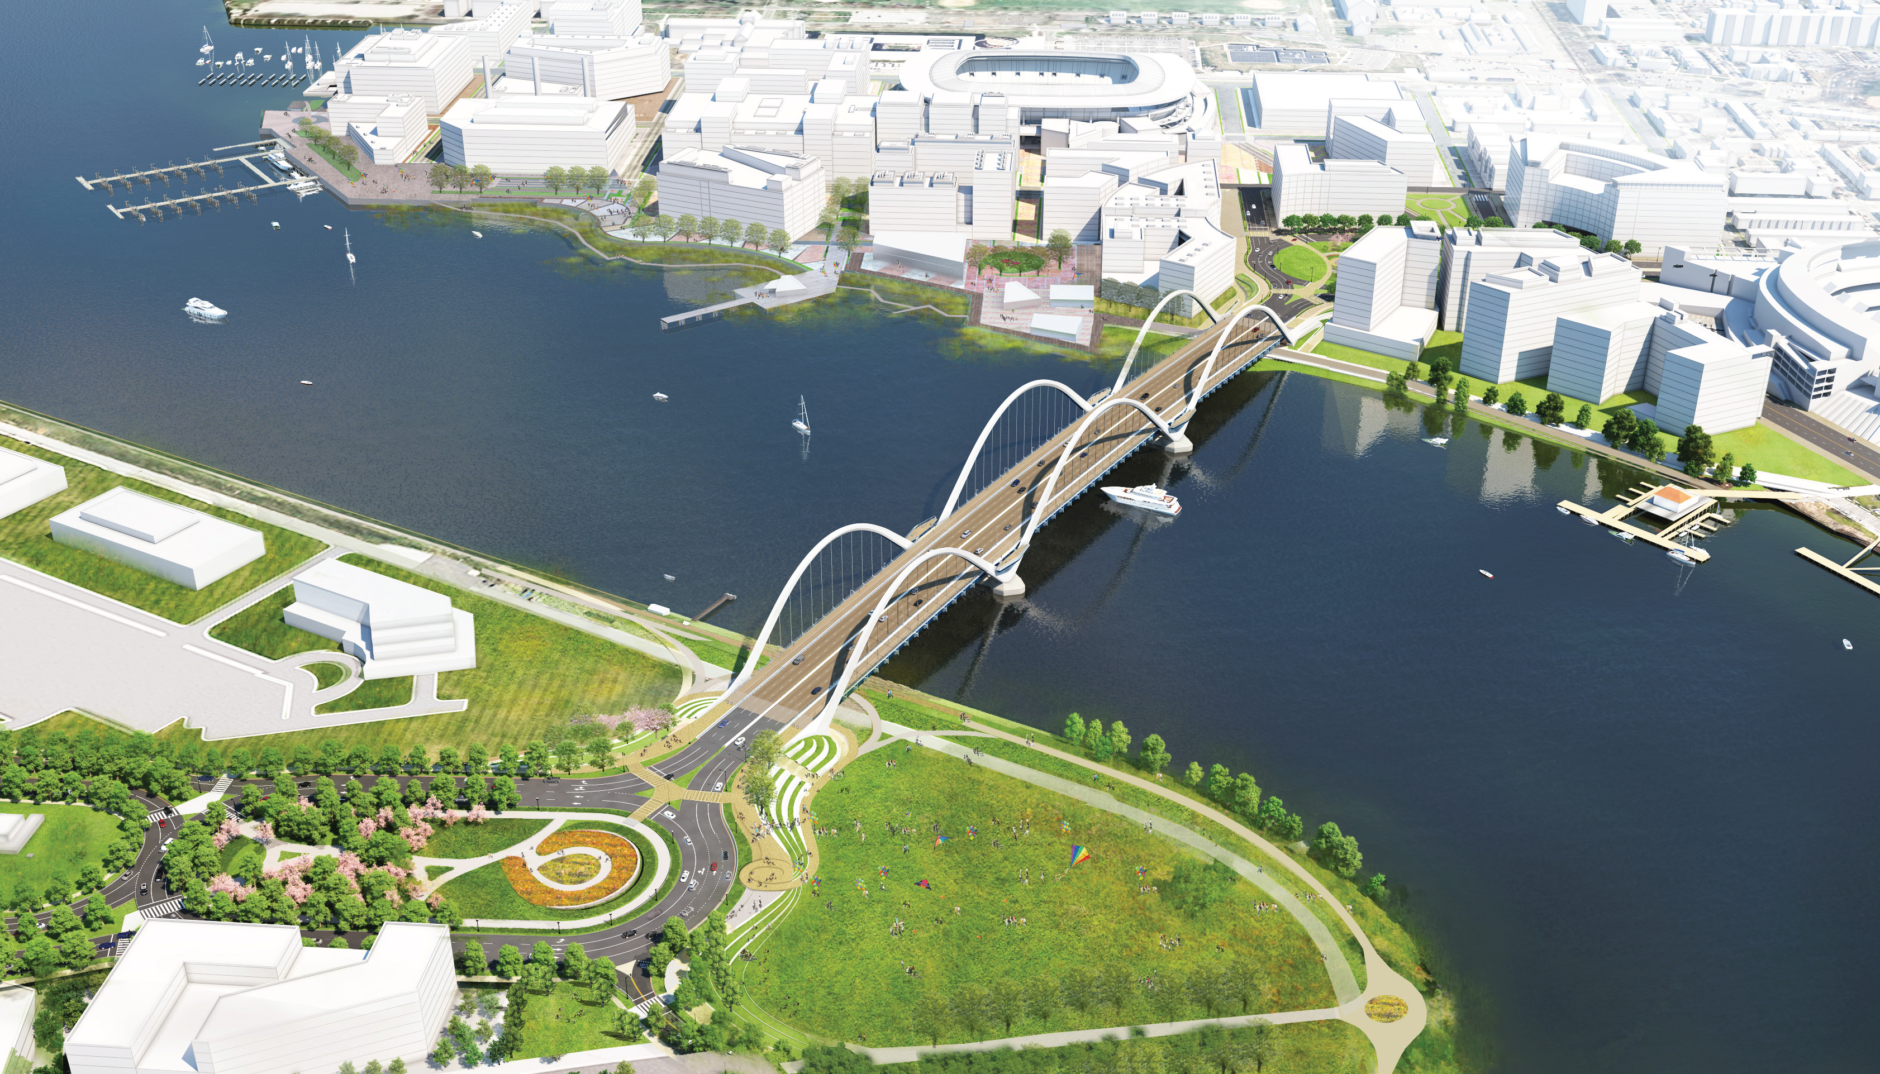 The $441 million project will also create new traffic ovals east of the river connecting South Capitol Street, Suitland Parkway and Anacostia Drive; and west of the river connecting South Capitol Street, Potomac Avenue and Q Street. (Courtesy DDOT)